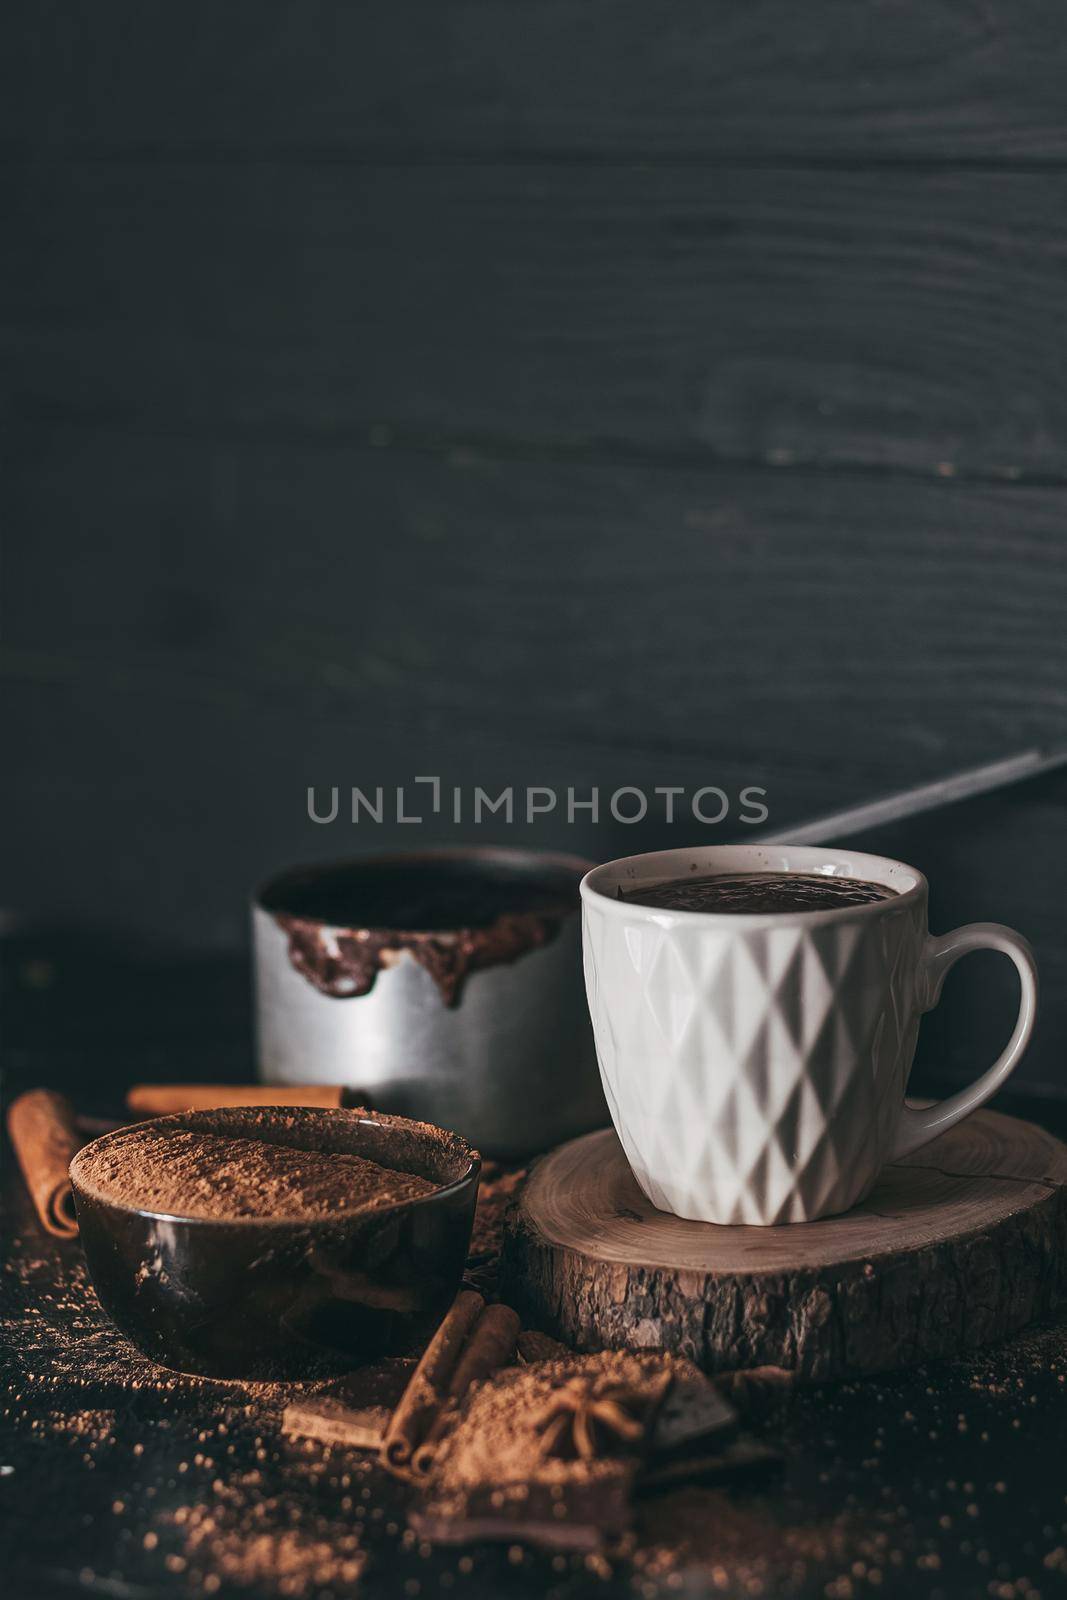 Cup of hot chocolate on dark background by mmp1206